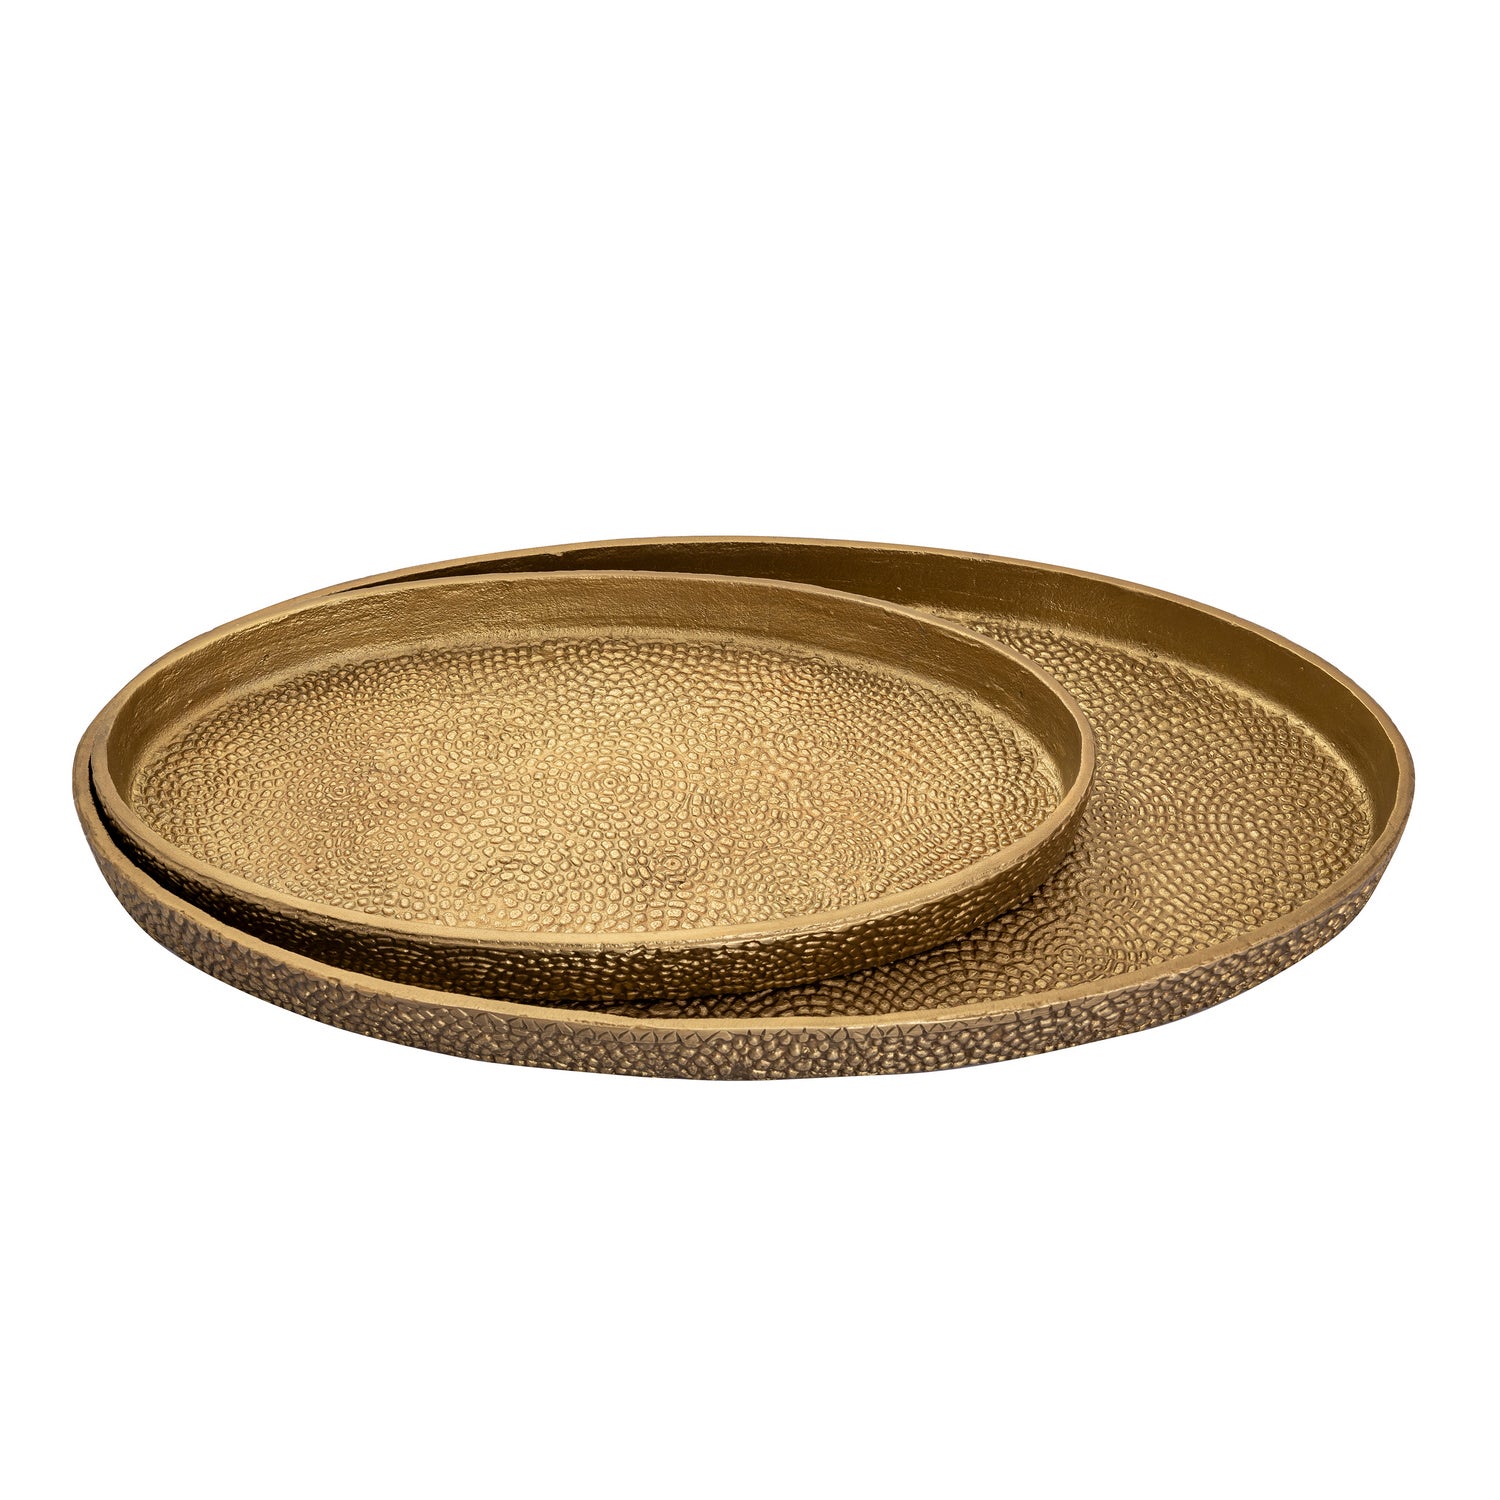 ELK Home - H0807-10655/S2 - Tray - Oval Pebble - Antique Brass